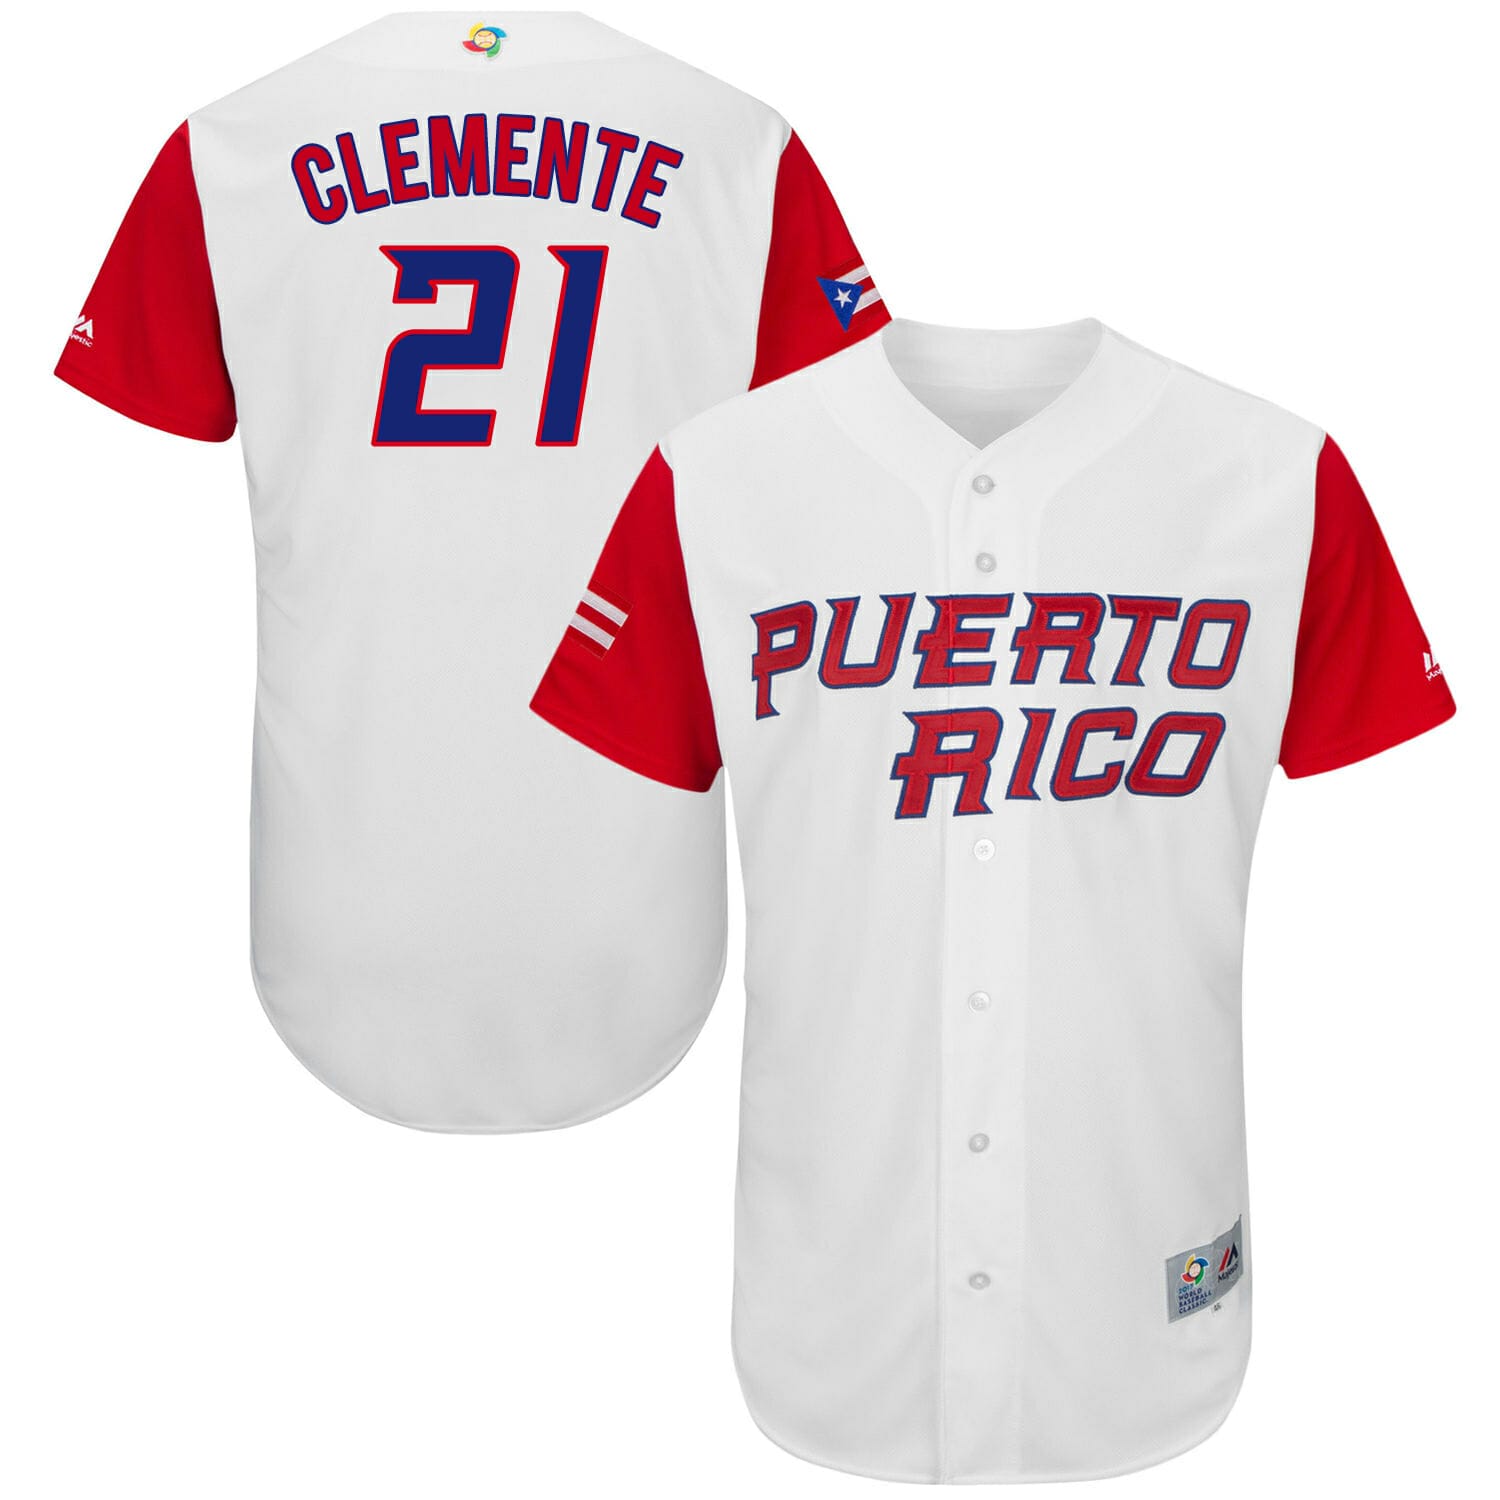 Puerto Rico Clemente Pirates' Jersey 21 Yellow